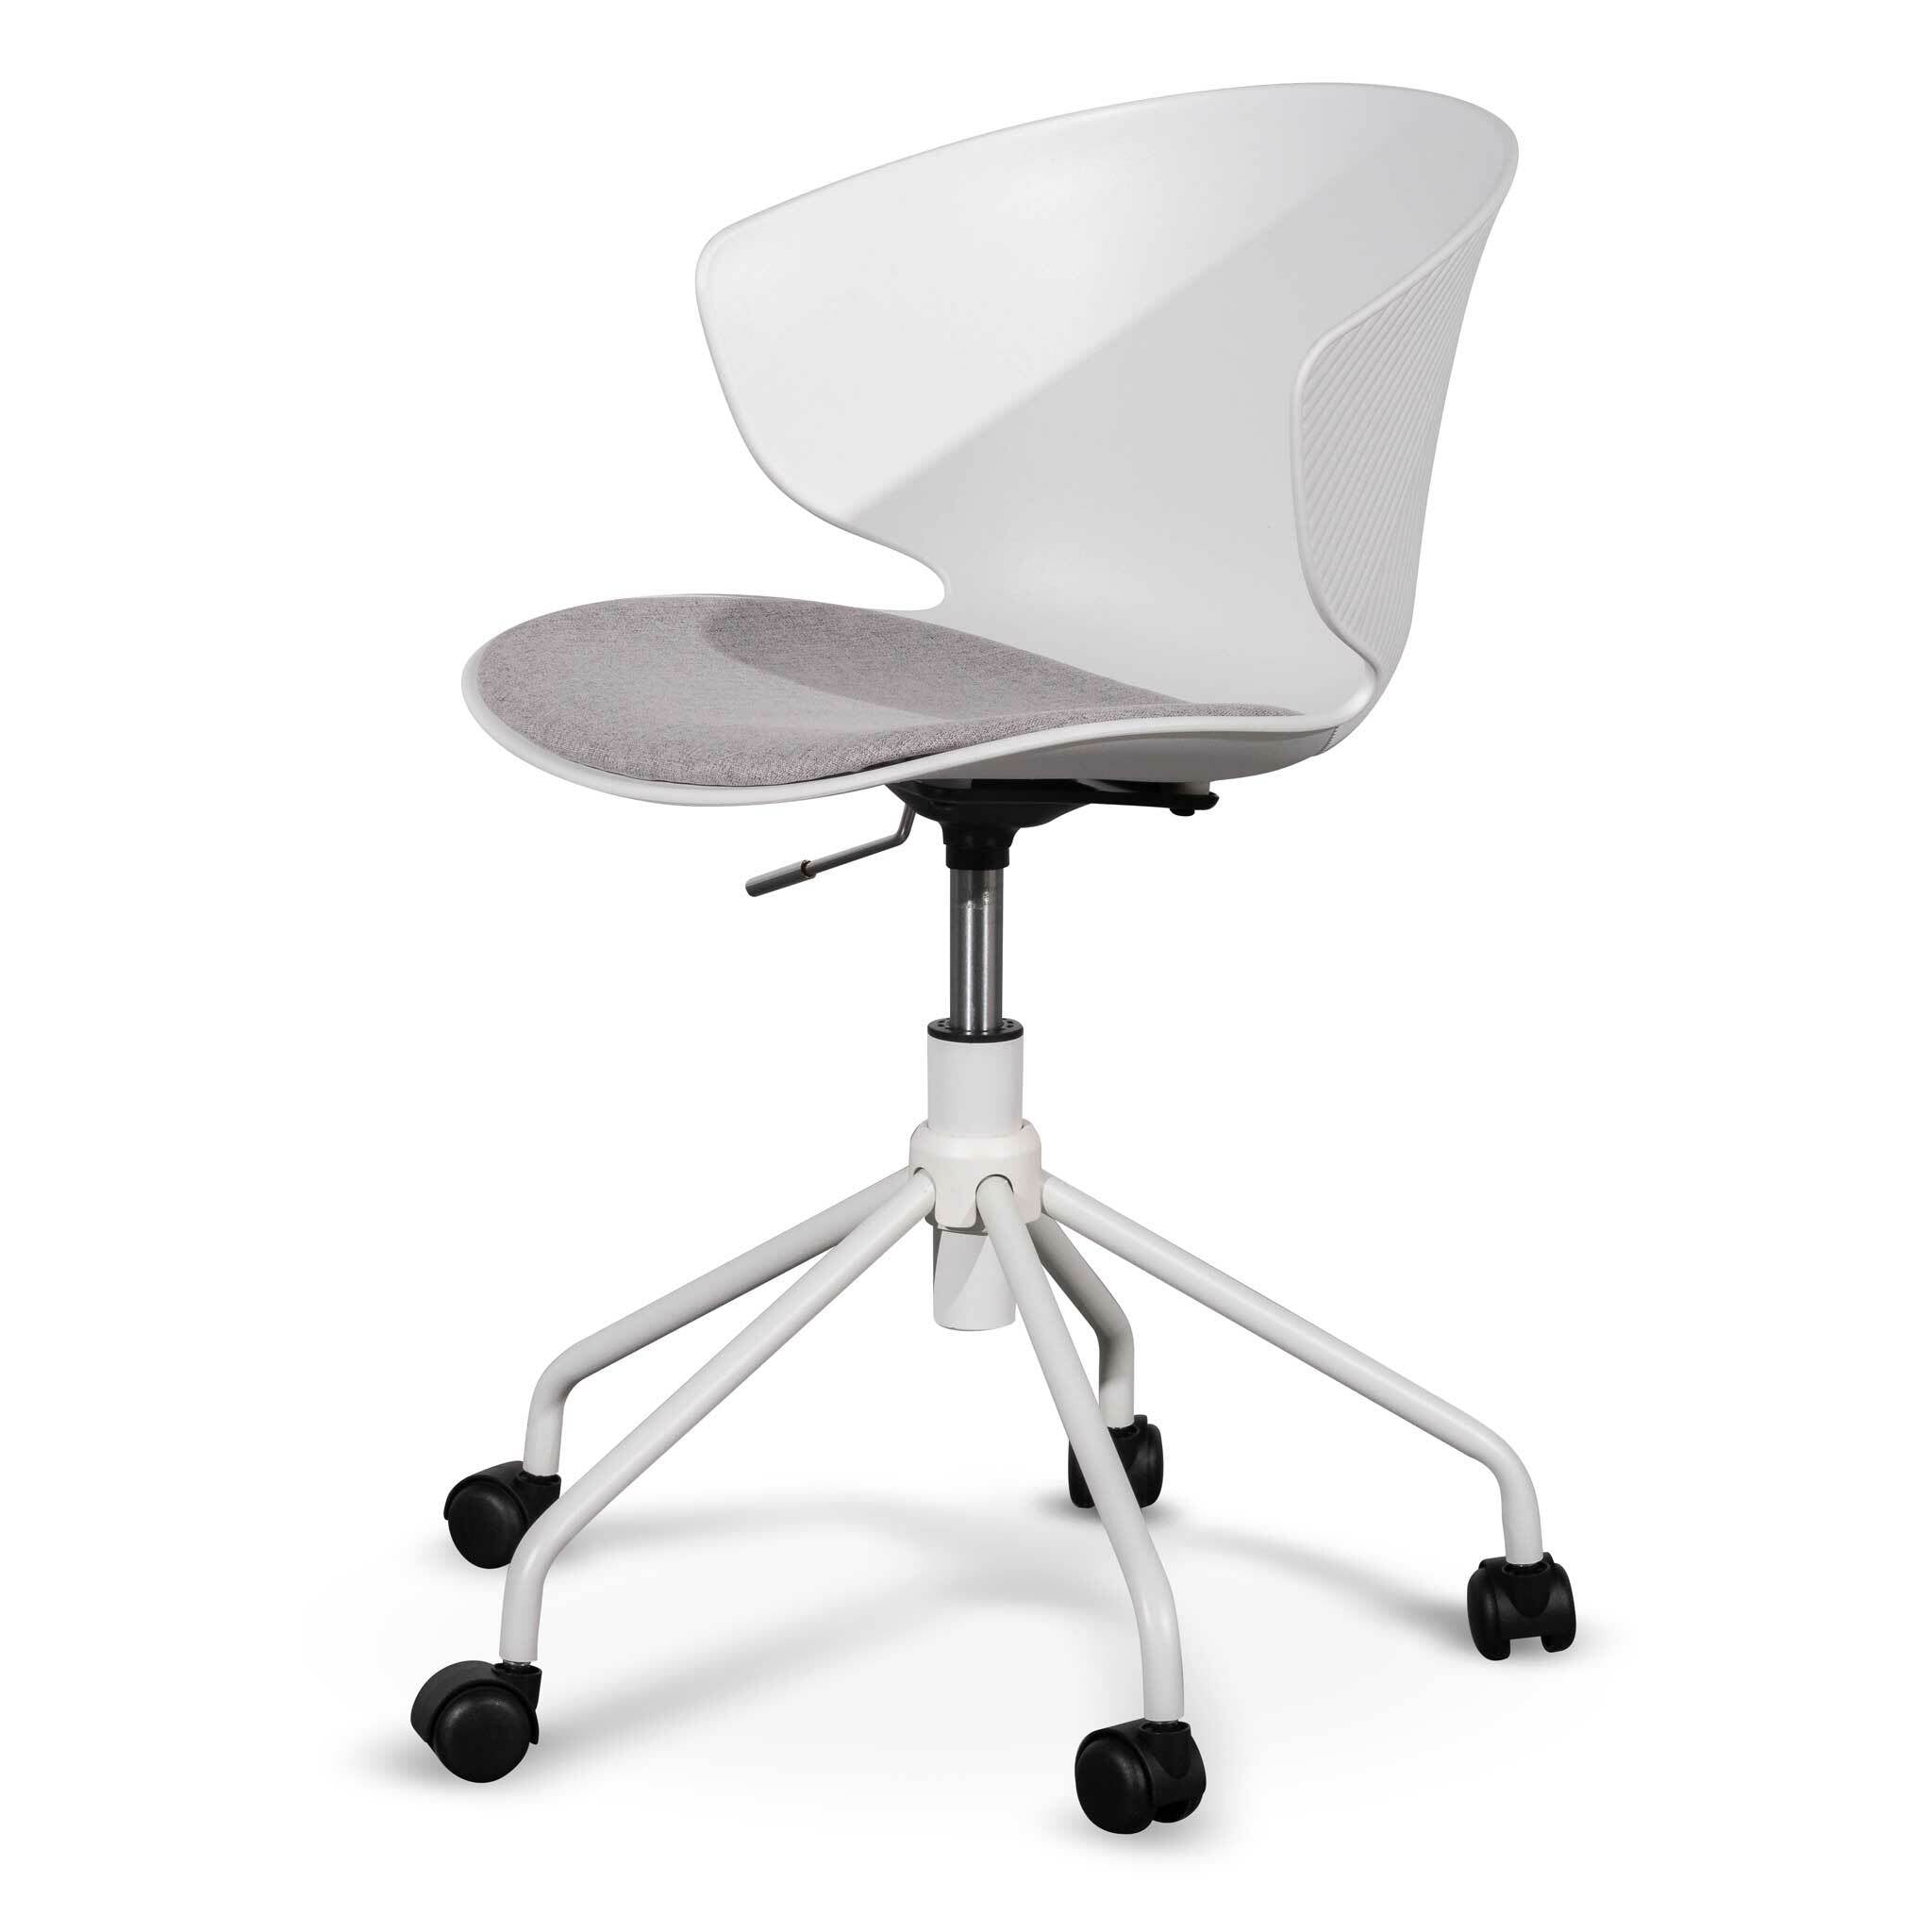 Betrillo White Office Chair - Light Grey Seat